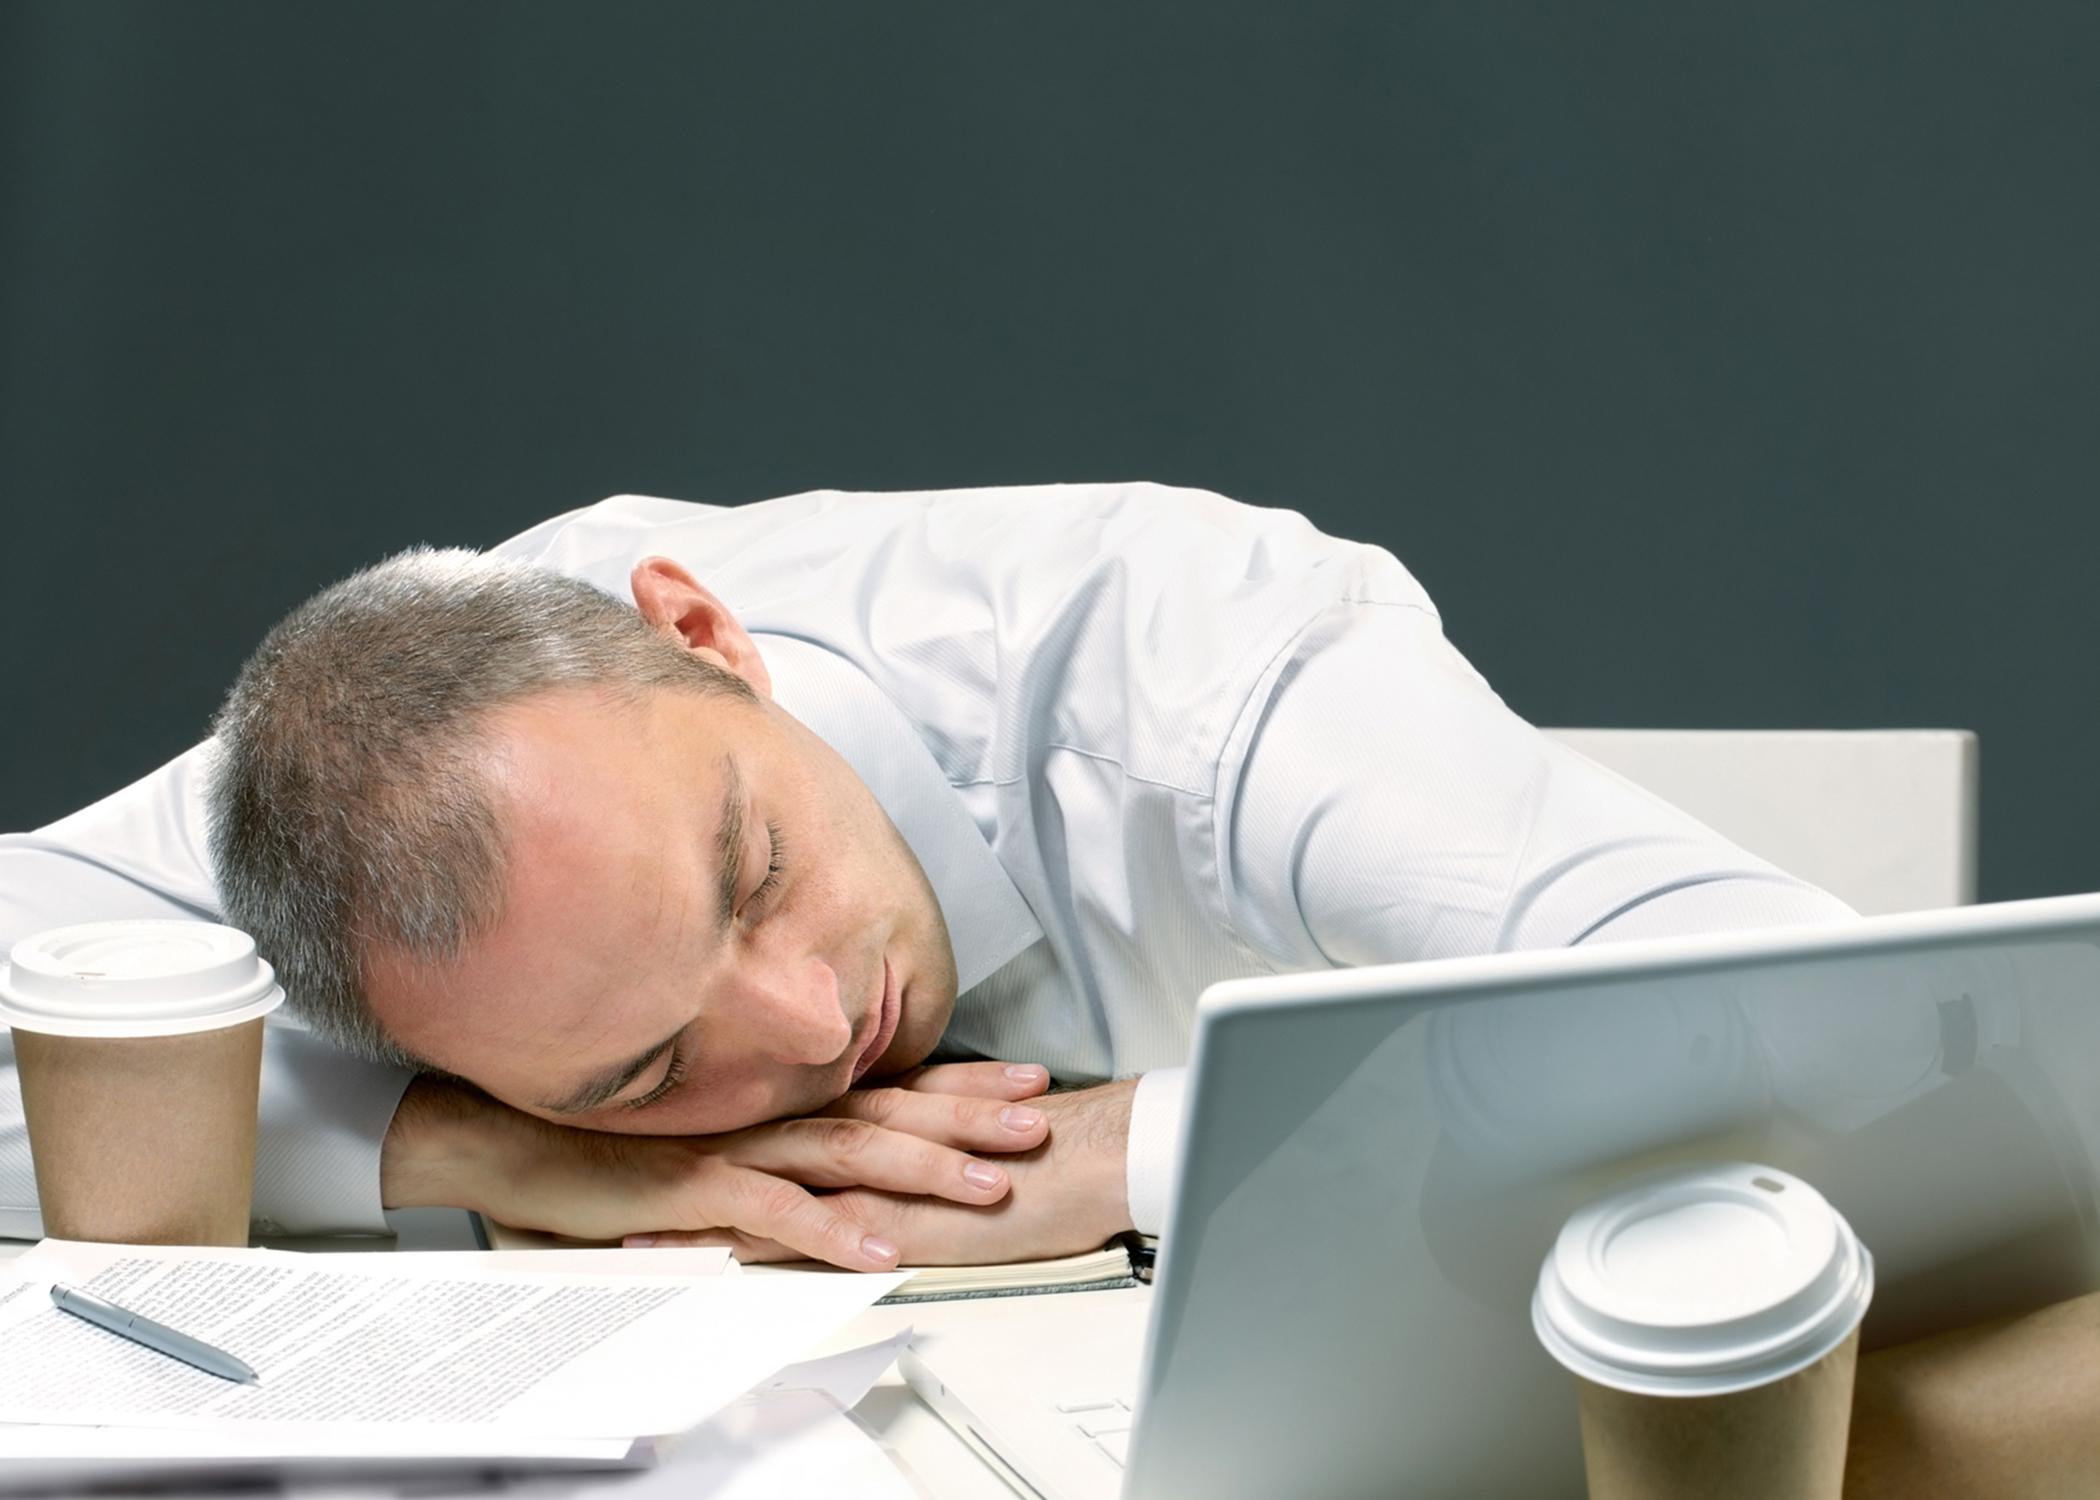 Stress and a lack of sleep can cause fatigue, interfere with productivity, and increase health problems. (Photo by iStock)